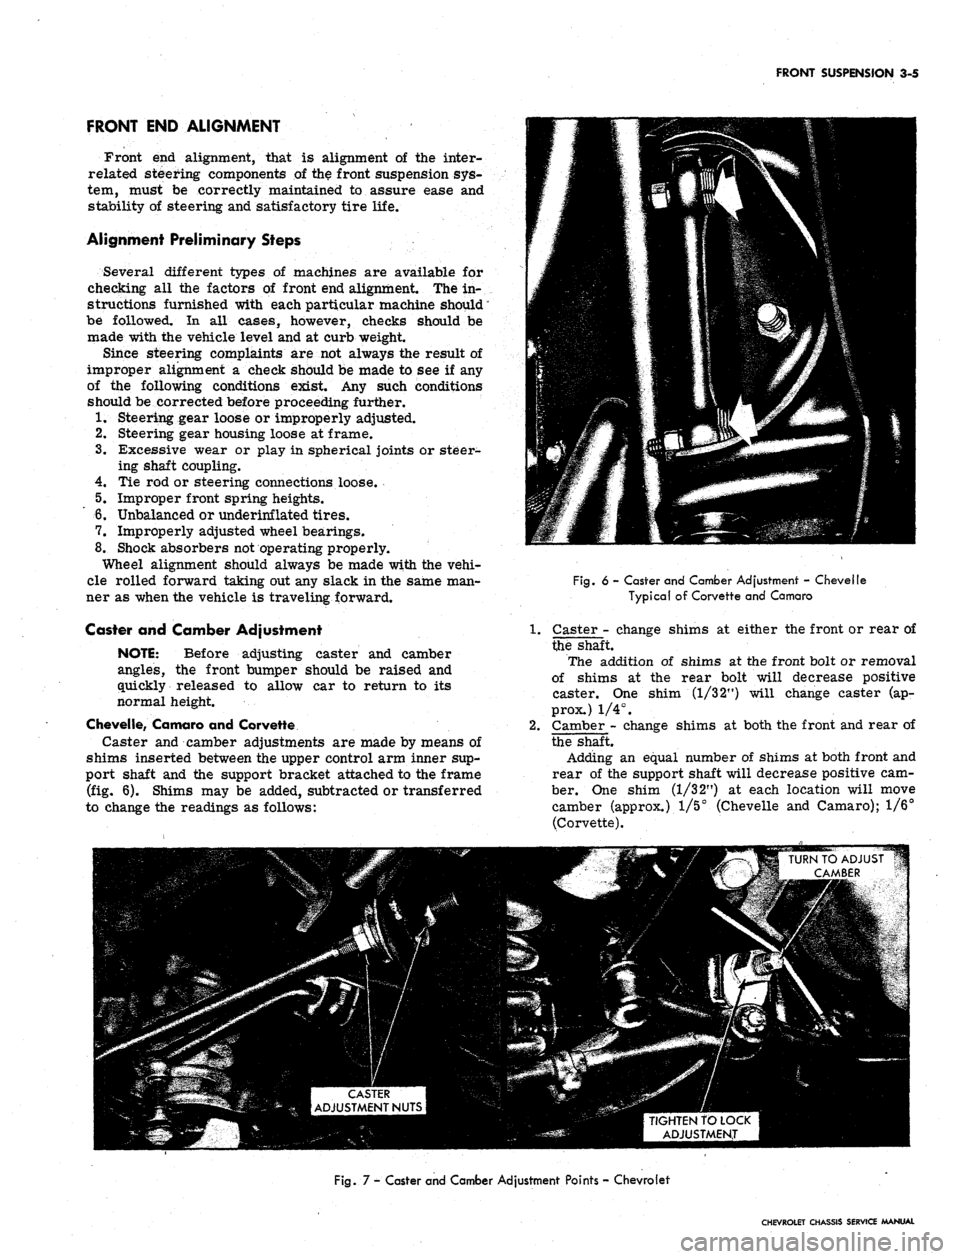 CHEVROLET CAMARO 1967 1.G Chassis User Guide 
FRONT SUSPENSION 3-5

FRONT END ALIGNMENT

Front end alignment, that is alignment of the inter-

related steering components of the front suspension sys-

tem, must be correctly maintained to assure 